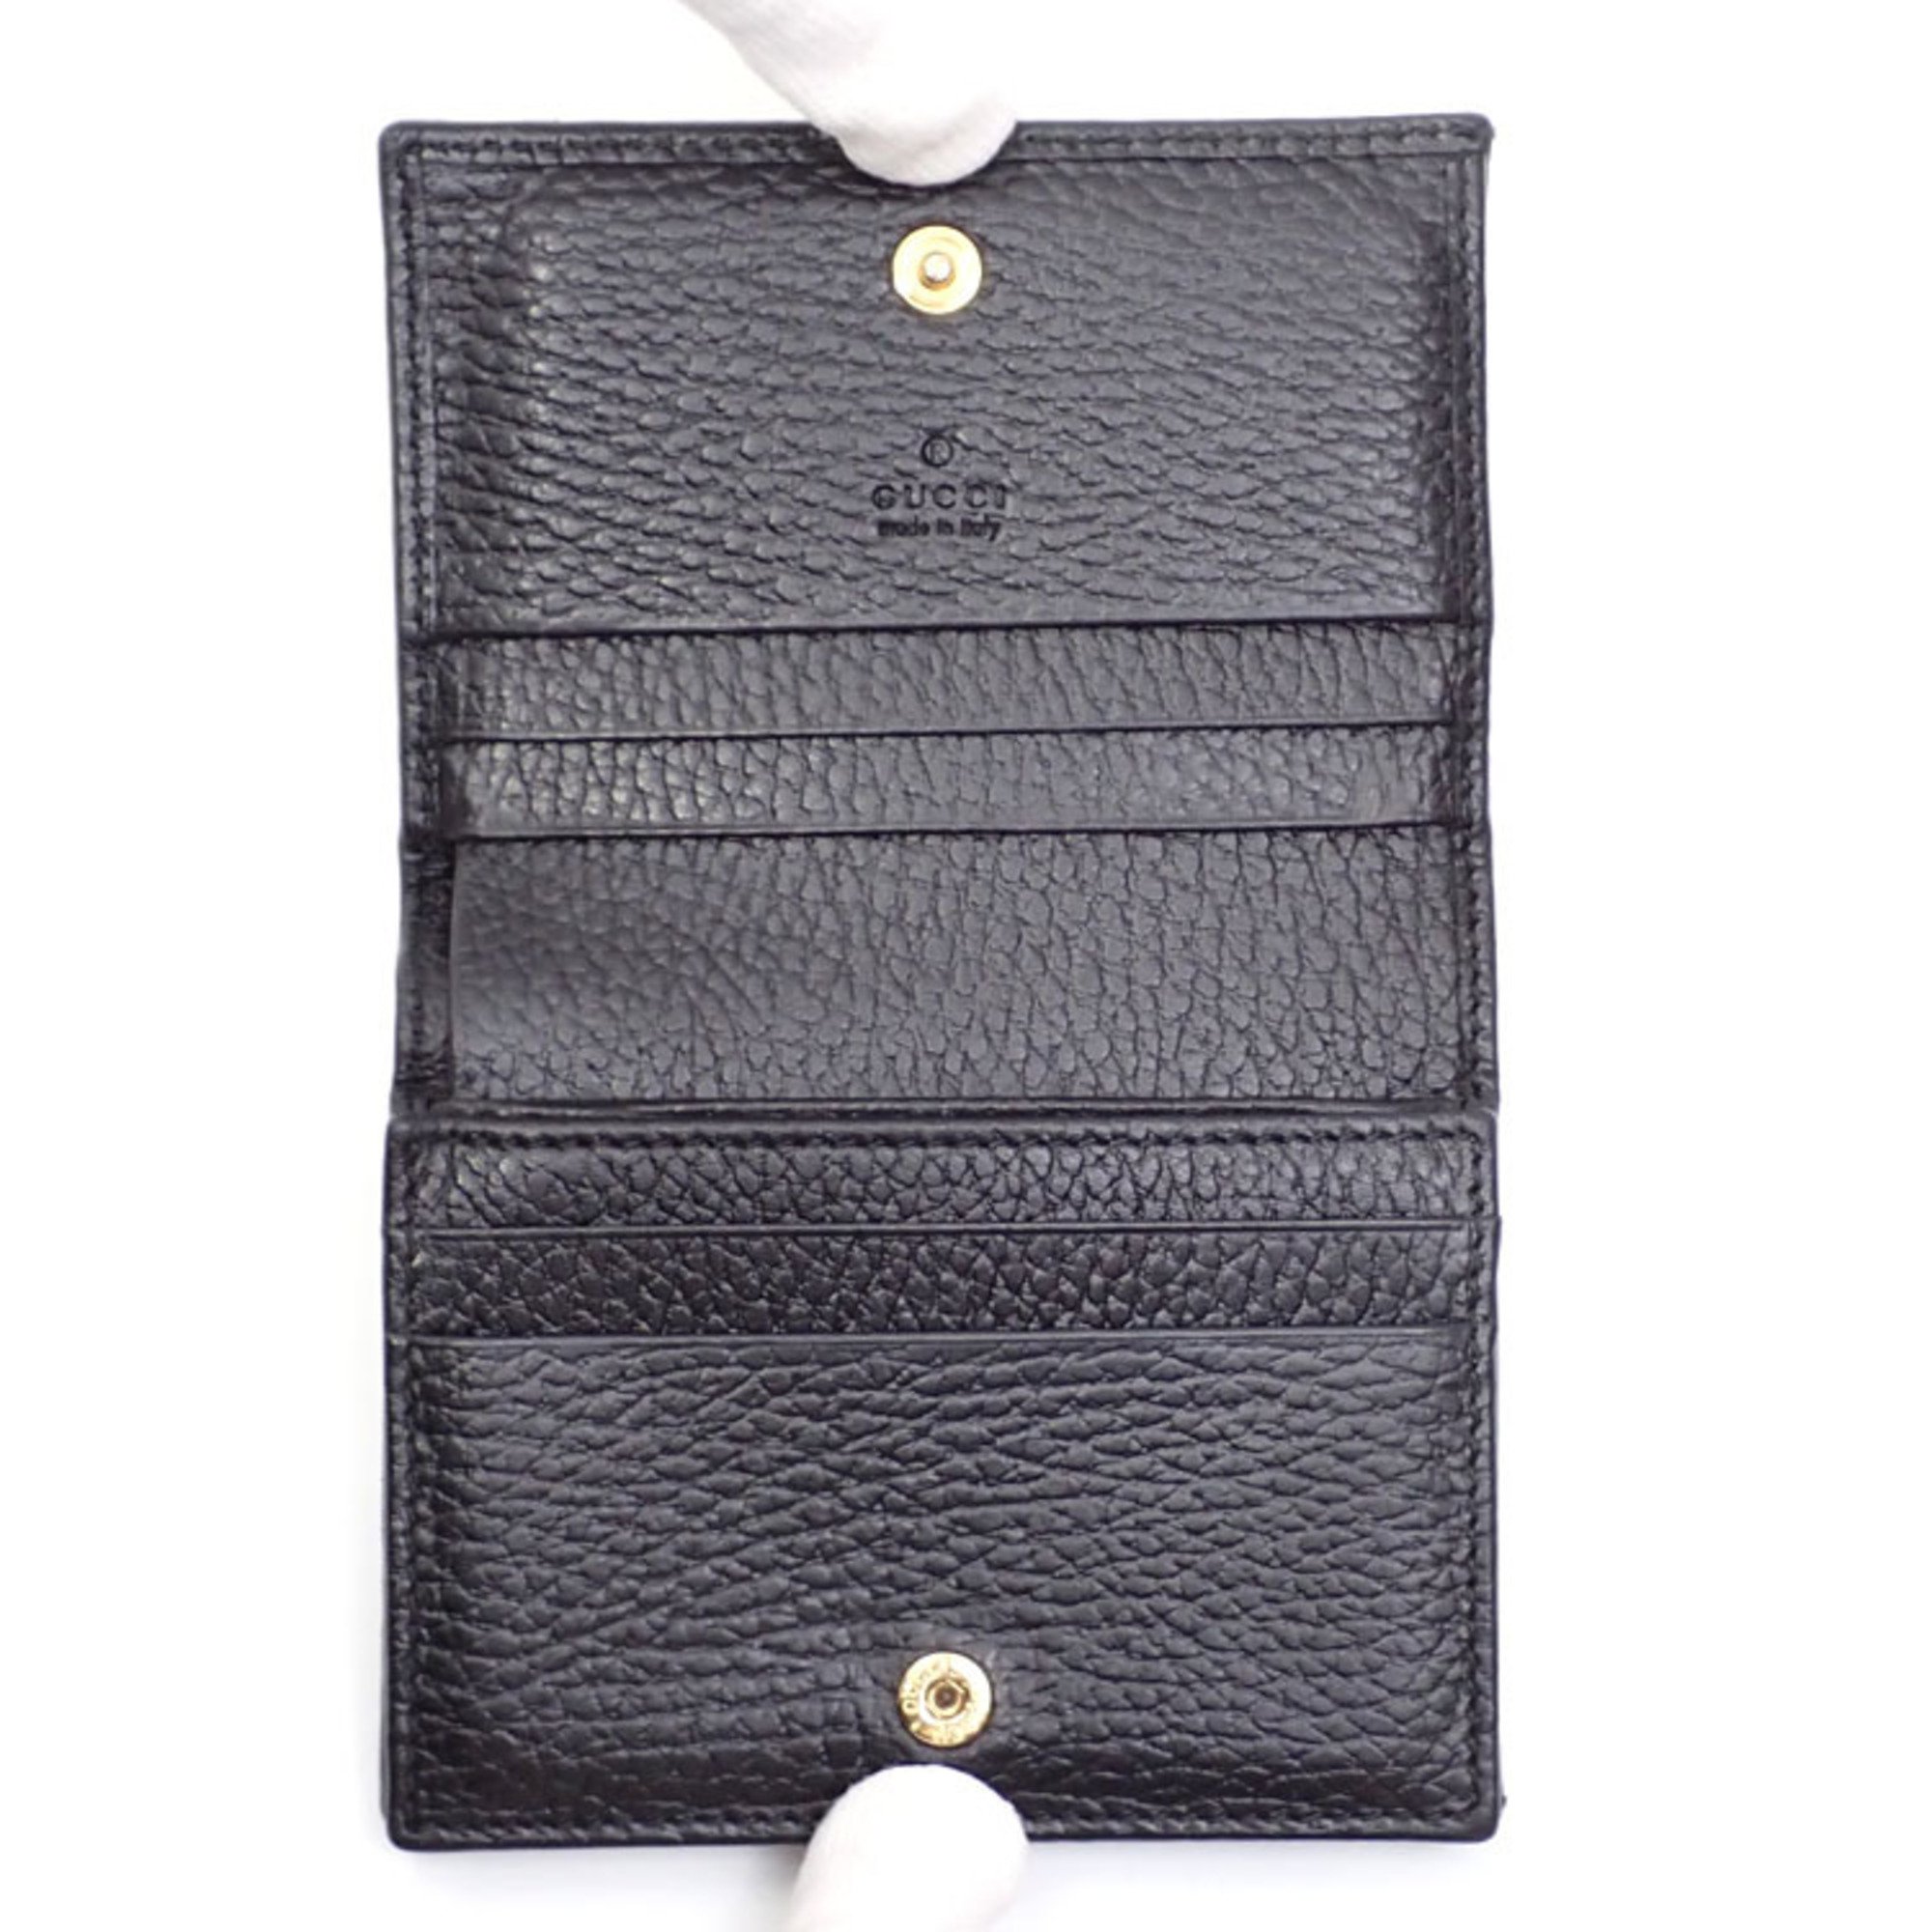 Gucci GG Marmont Bi-fold Wallet for Women, Black Leather 456126